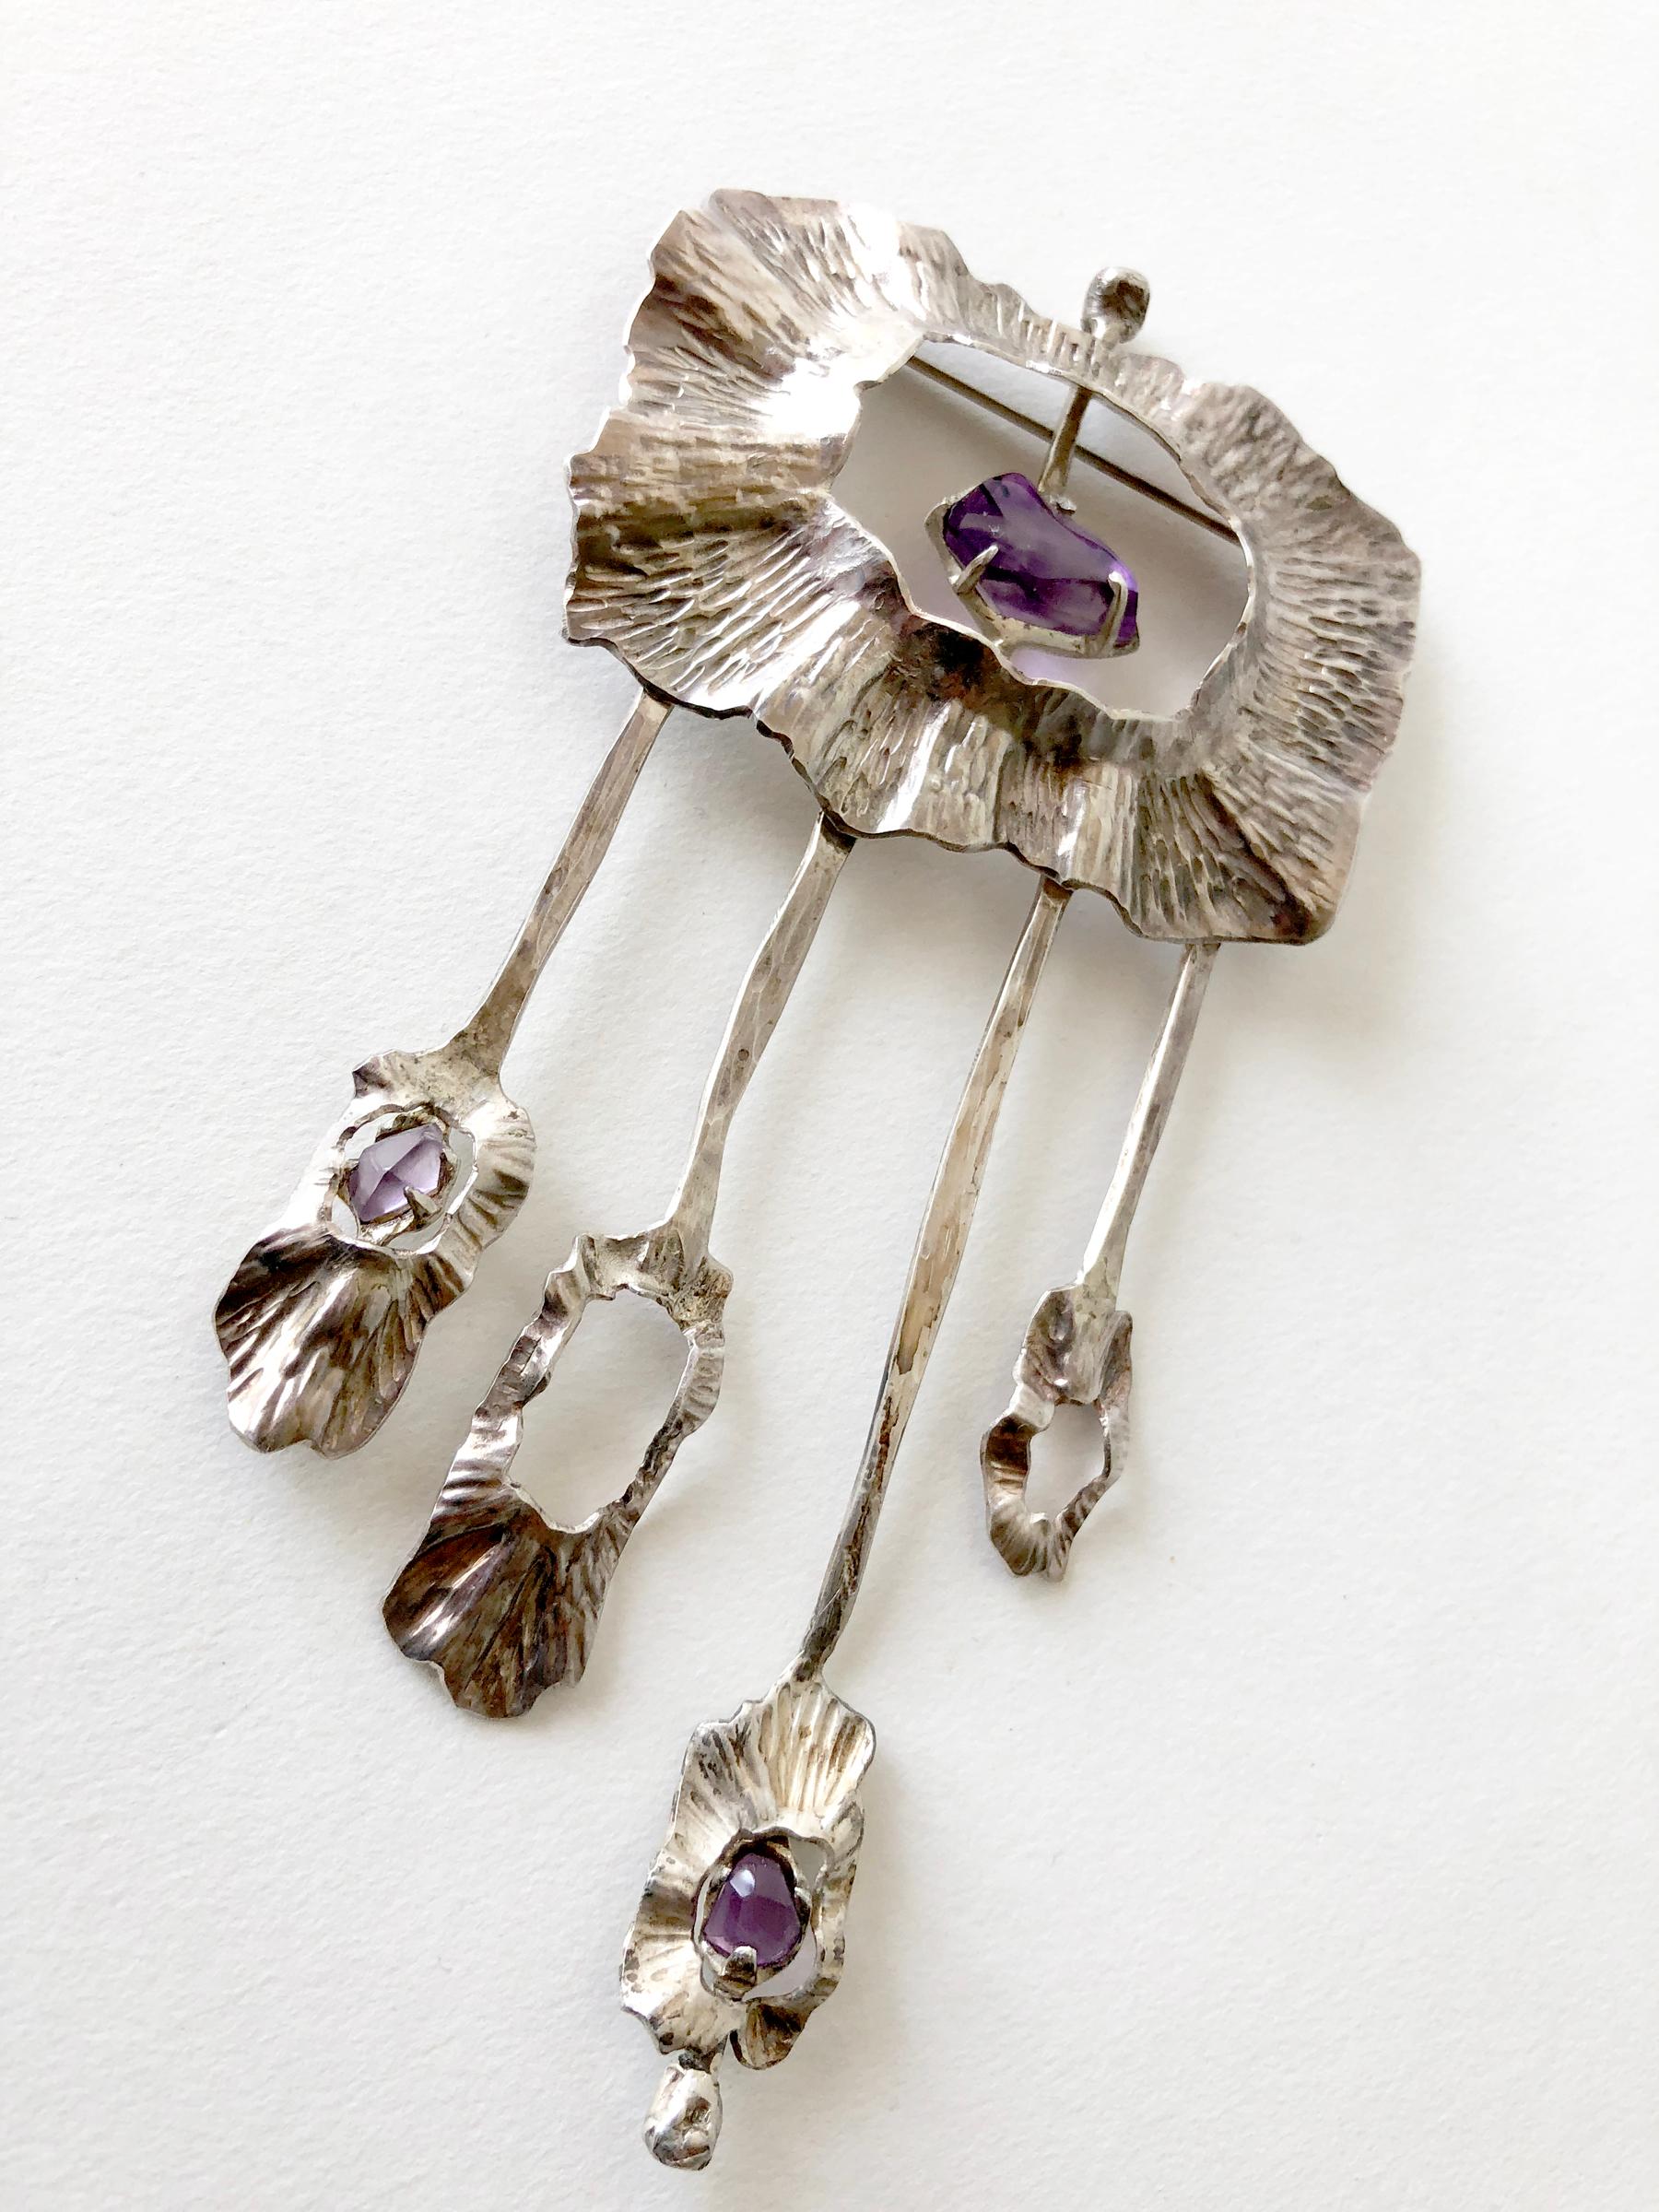 1970's California studio sterling silver and hand faceted amethyst kinetic brooch created by artist Mona Trunkfield of San Diego, California.  Brooch measures 4